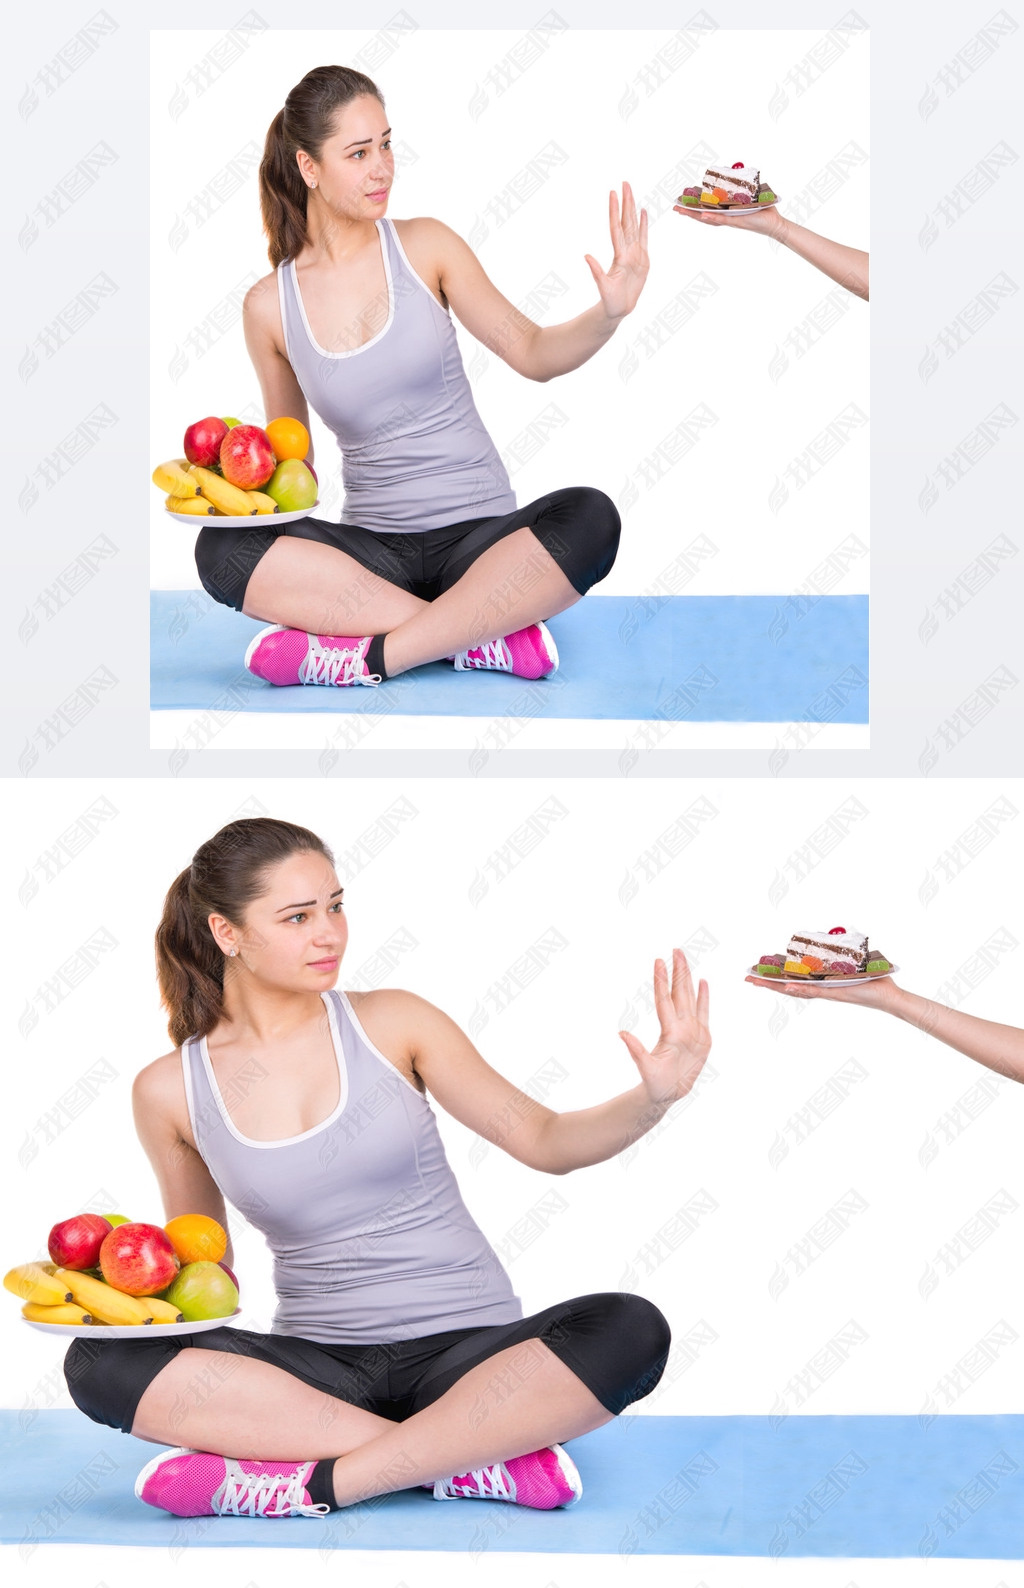 girl on a sports carpet chooses fruit instead of sweets